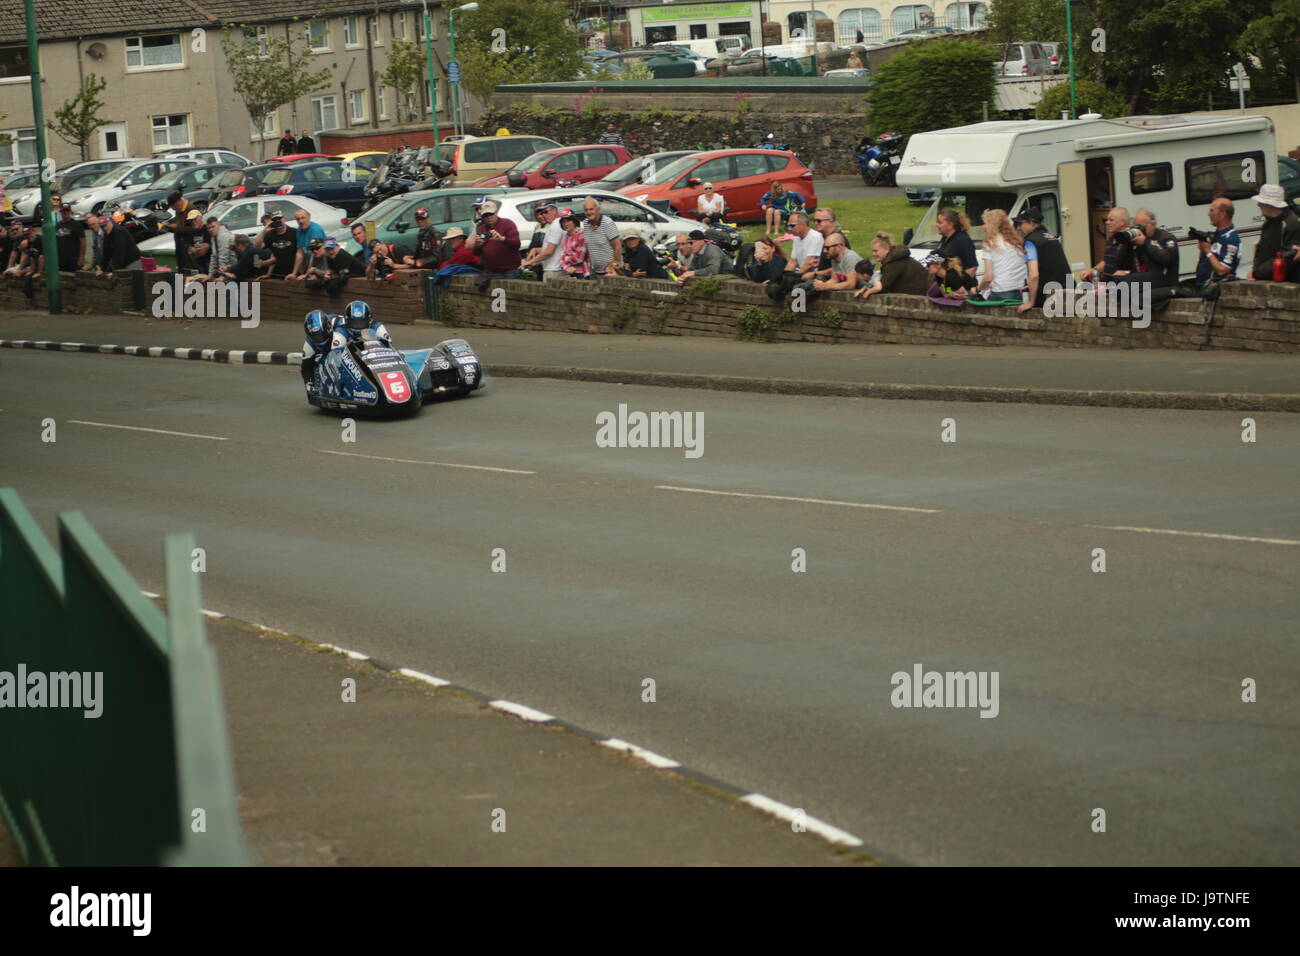 Isle of Man TT Races, Qualifying Practice Race, Saturday 3 June 2017.Sidecar qualifying session. Number 6 Peter Founds and  Jevan Walmsley on their 600cc Suzuki sidecar of the Trustland Group  team  Credit: Eclectic Art and Photography/Alamy Live News. Stock Photo